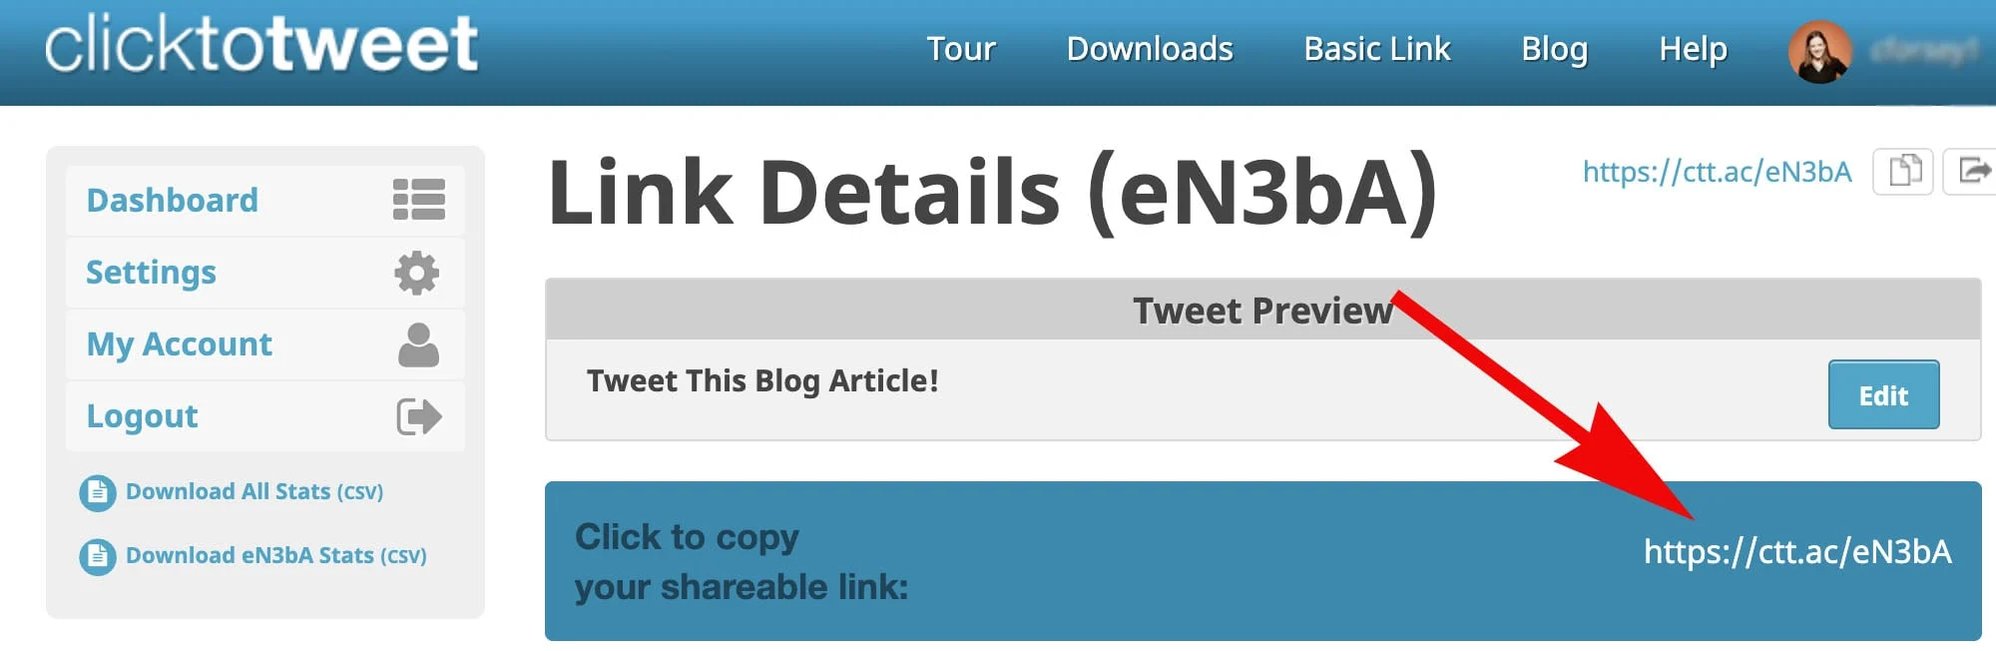 how to use clicktotweet.com to generate a new link